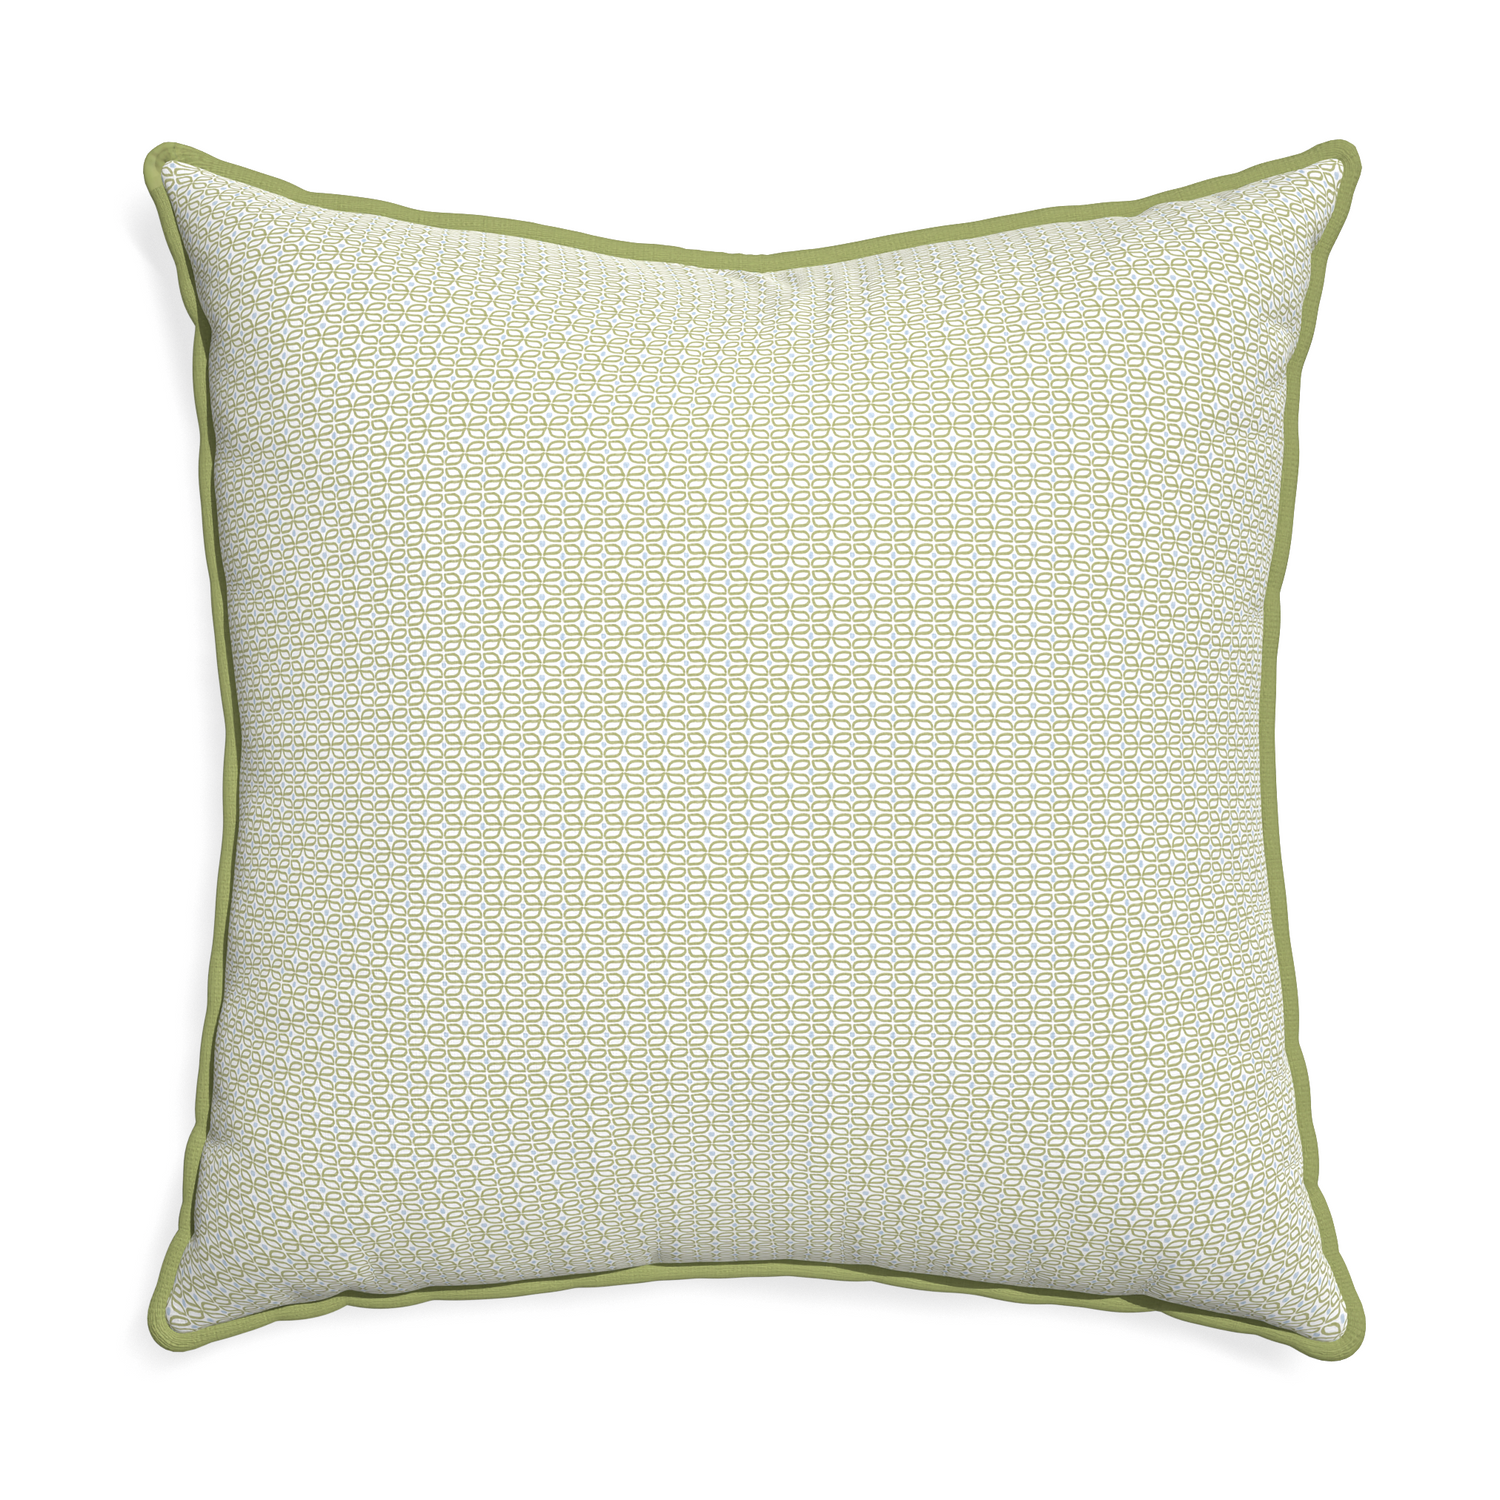 Euro-sham loomi moss custom pillow with moss piping on white background